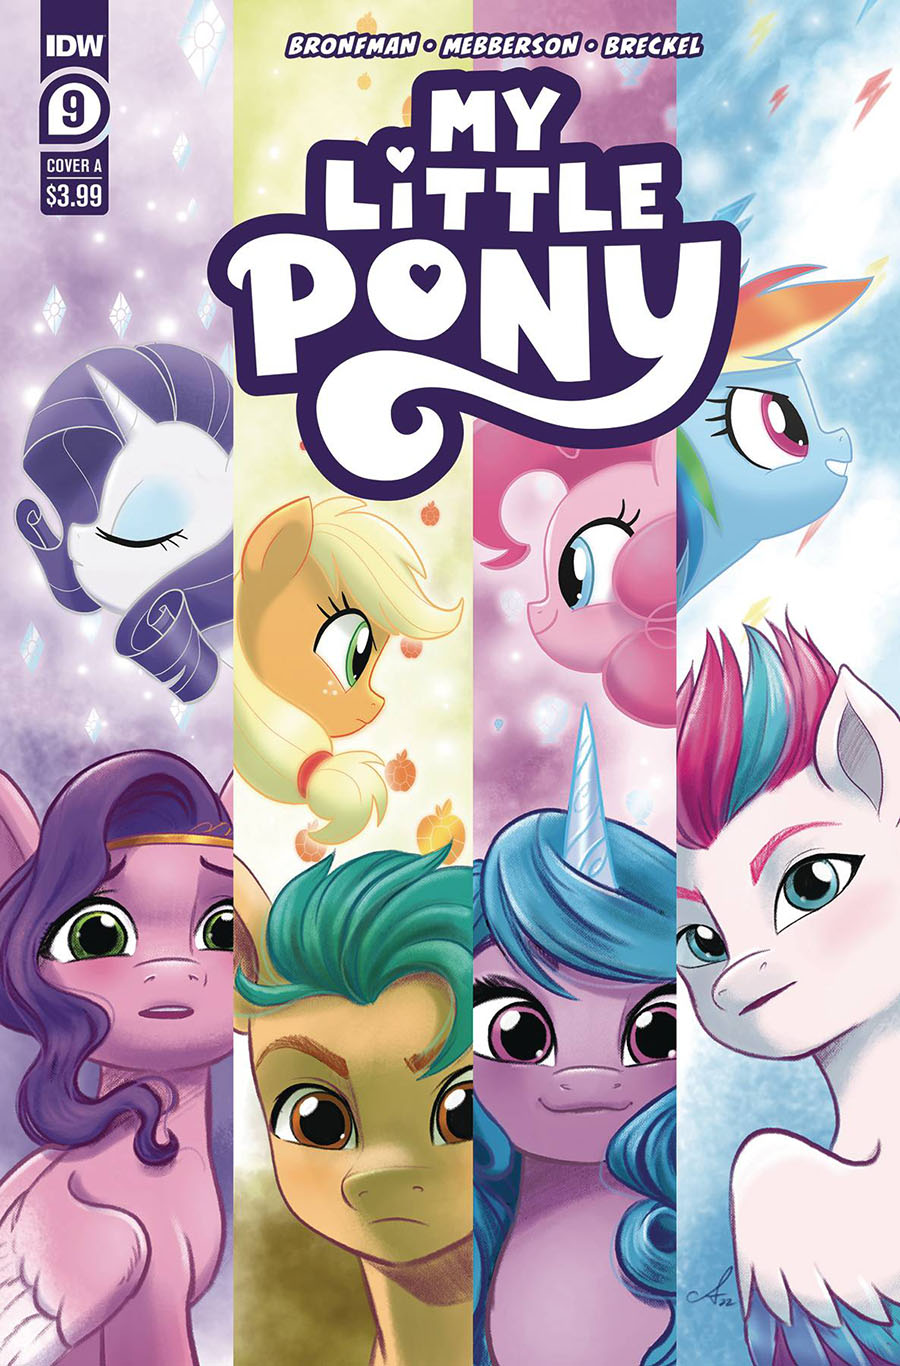 My Little Pony #9 Cover A Regular Amy Mebberson Cover